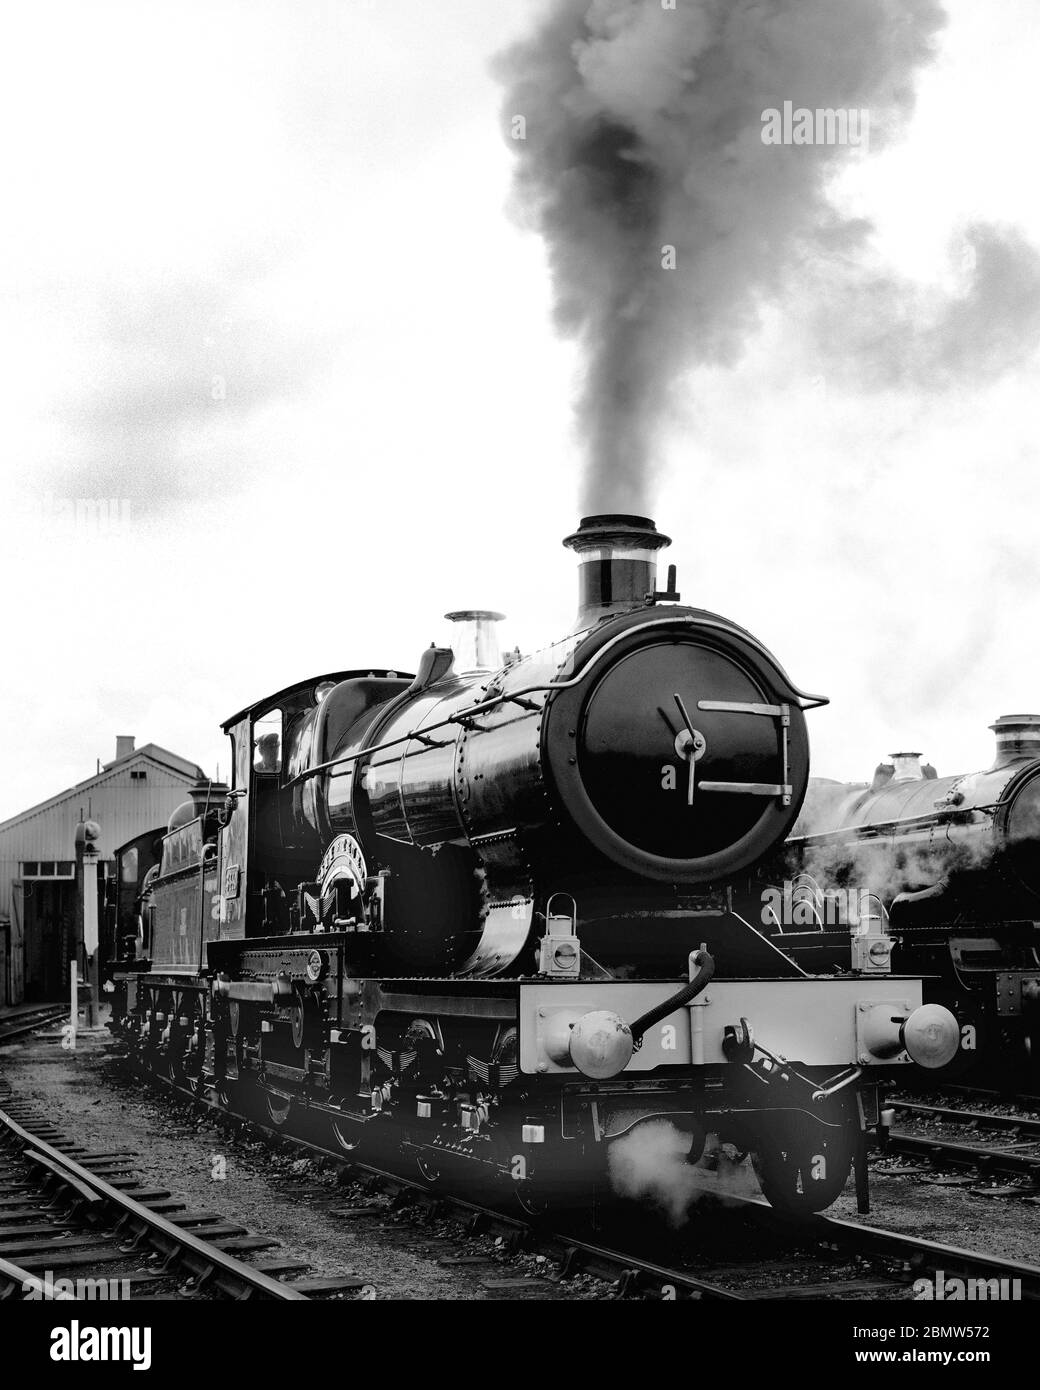 Steam engine 3440 city truro Black and White Stock Photos & Images - Alamy